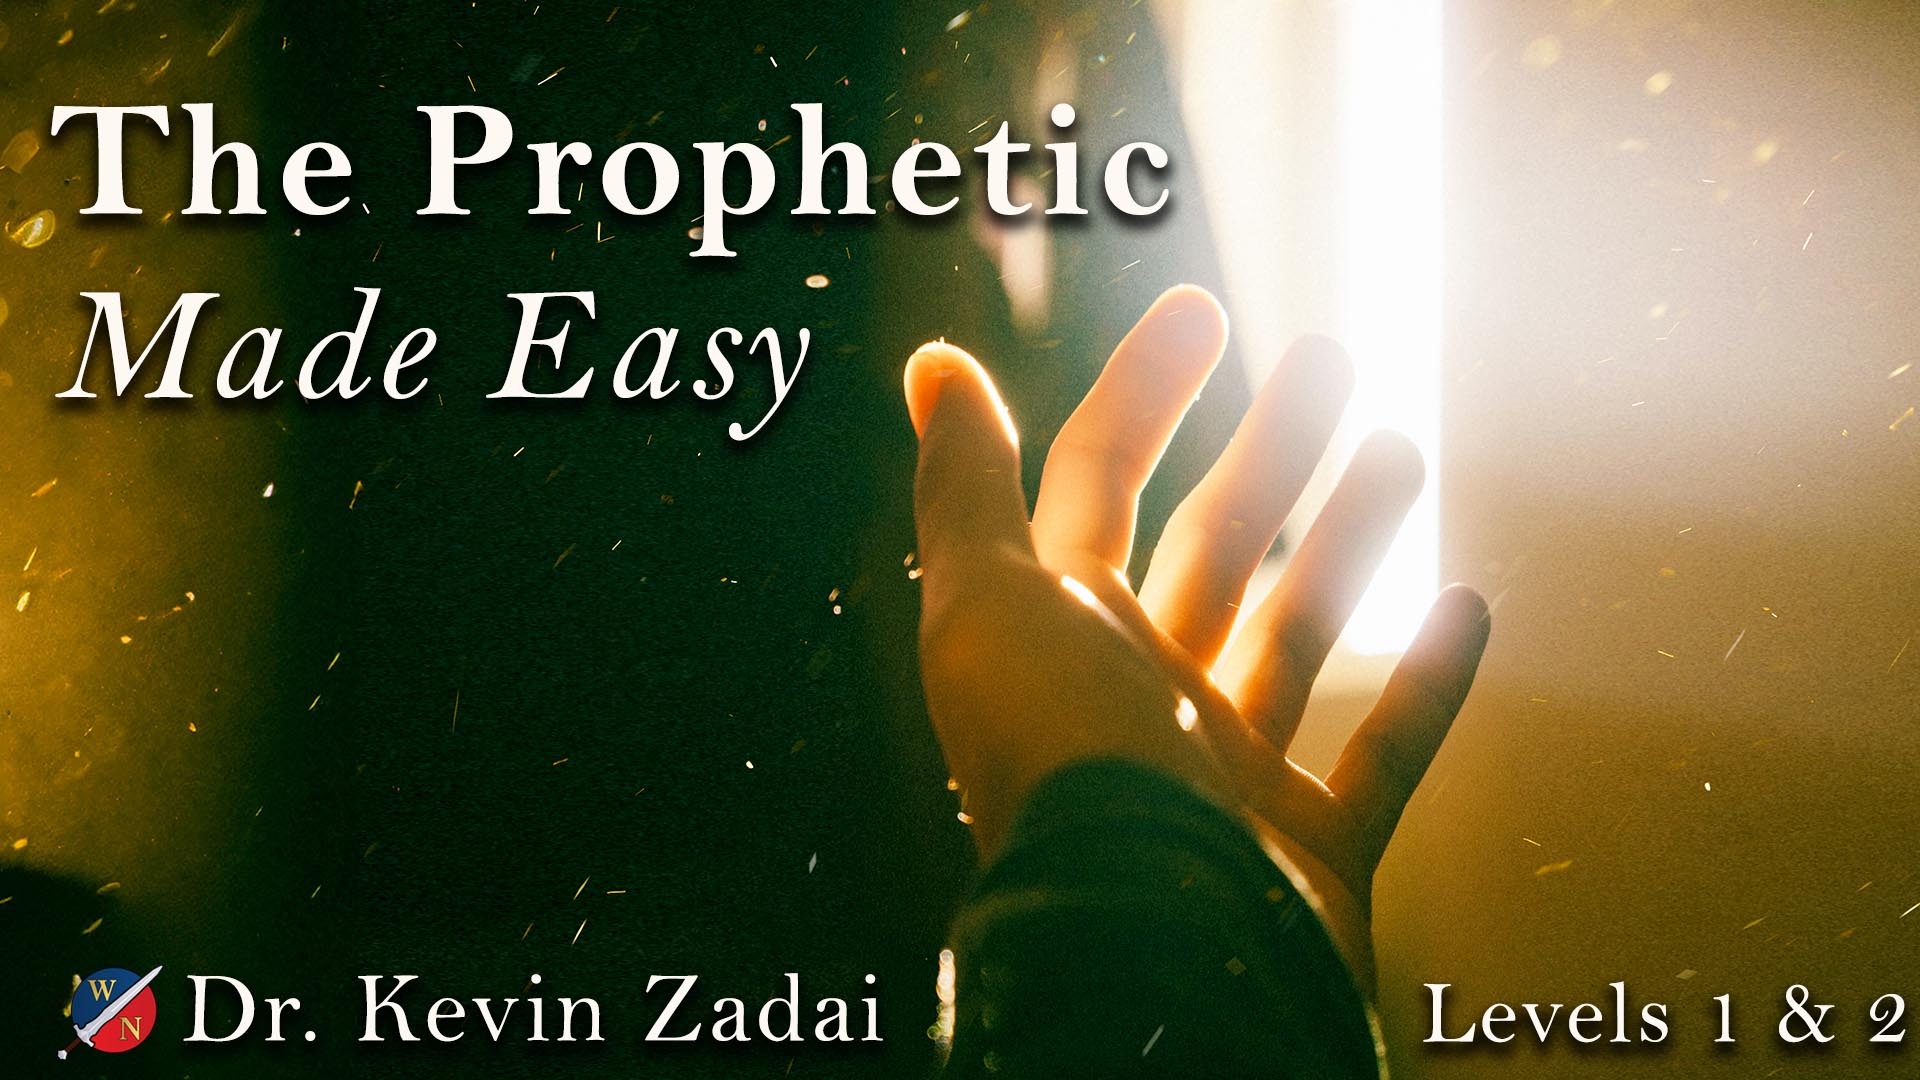 The Prophetic Made Easy by Dr. Kevin Zadai